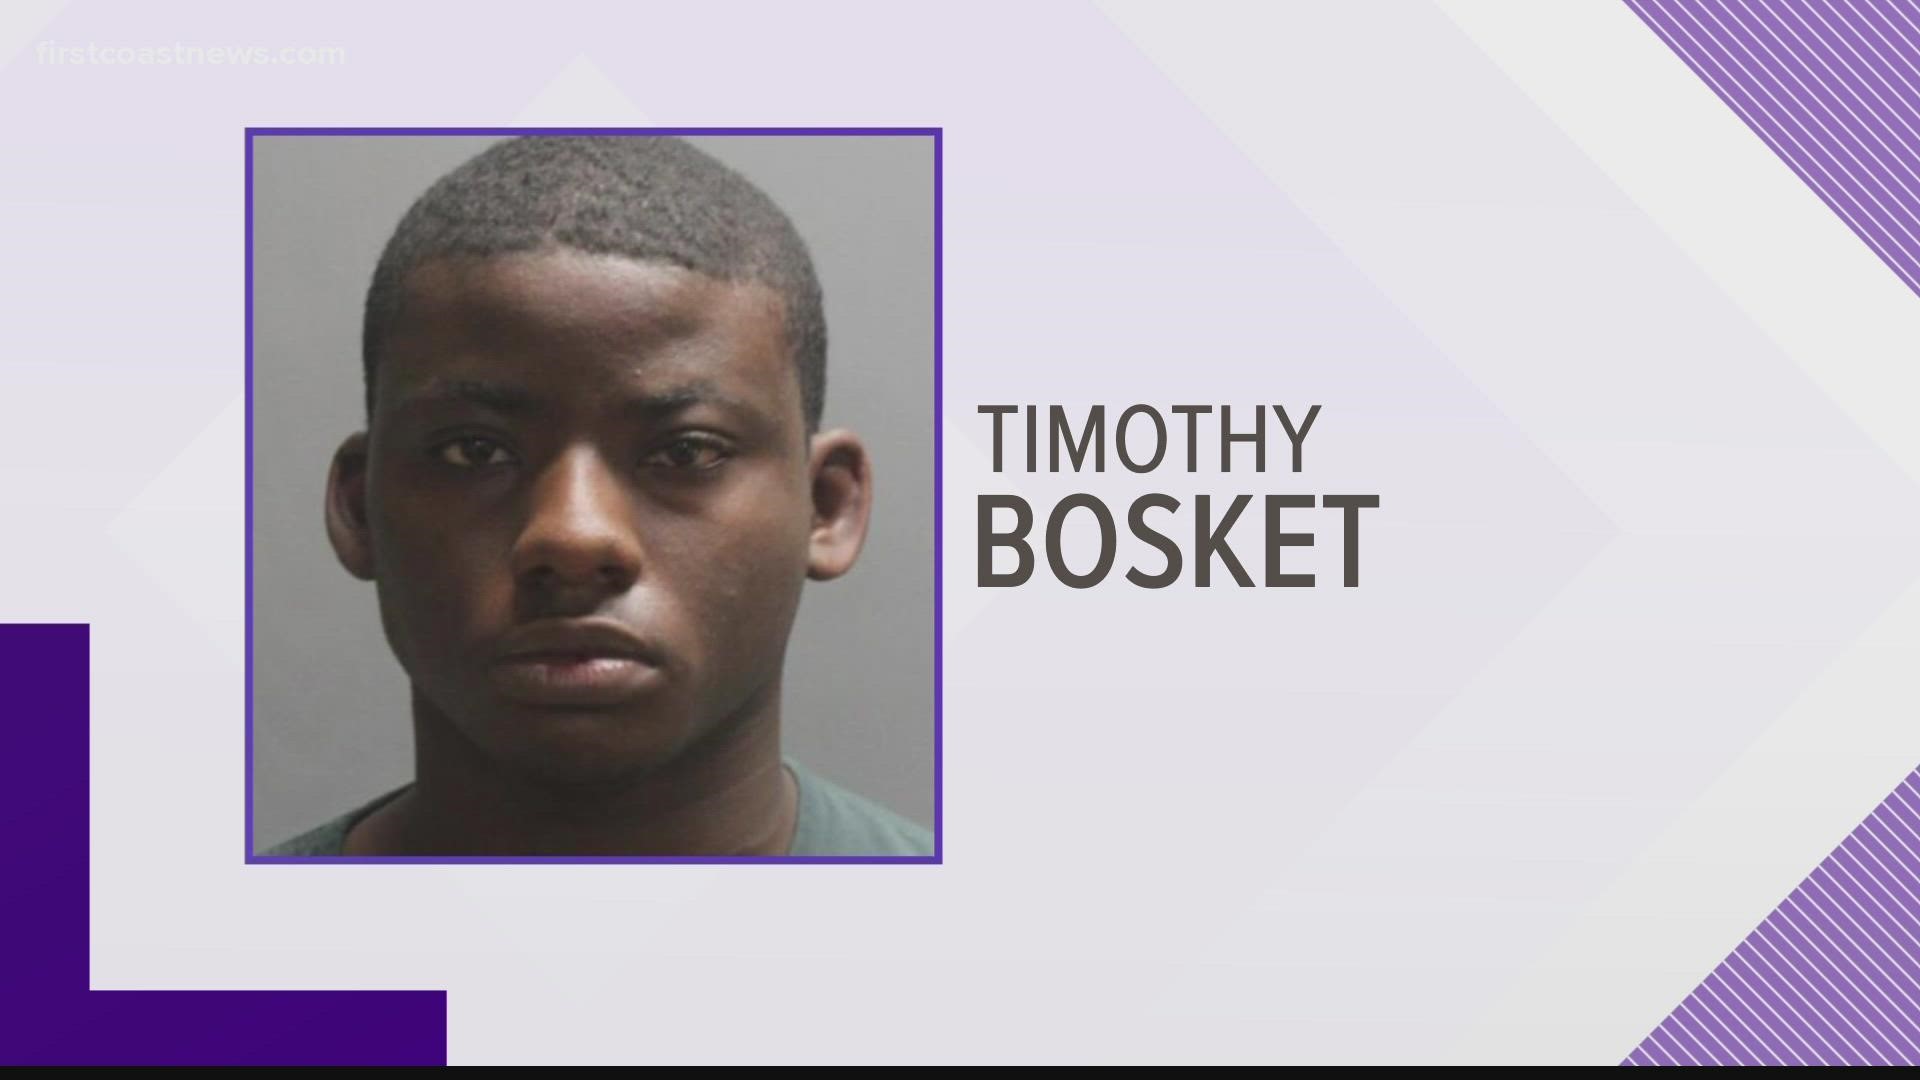 Police announced Monday they arrested 18-year-old Timothy Bosket in connection with the shooting.